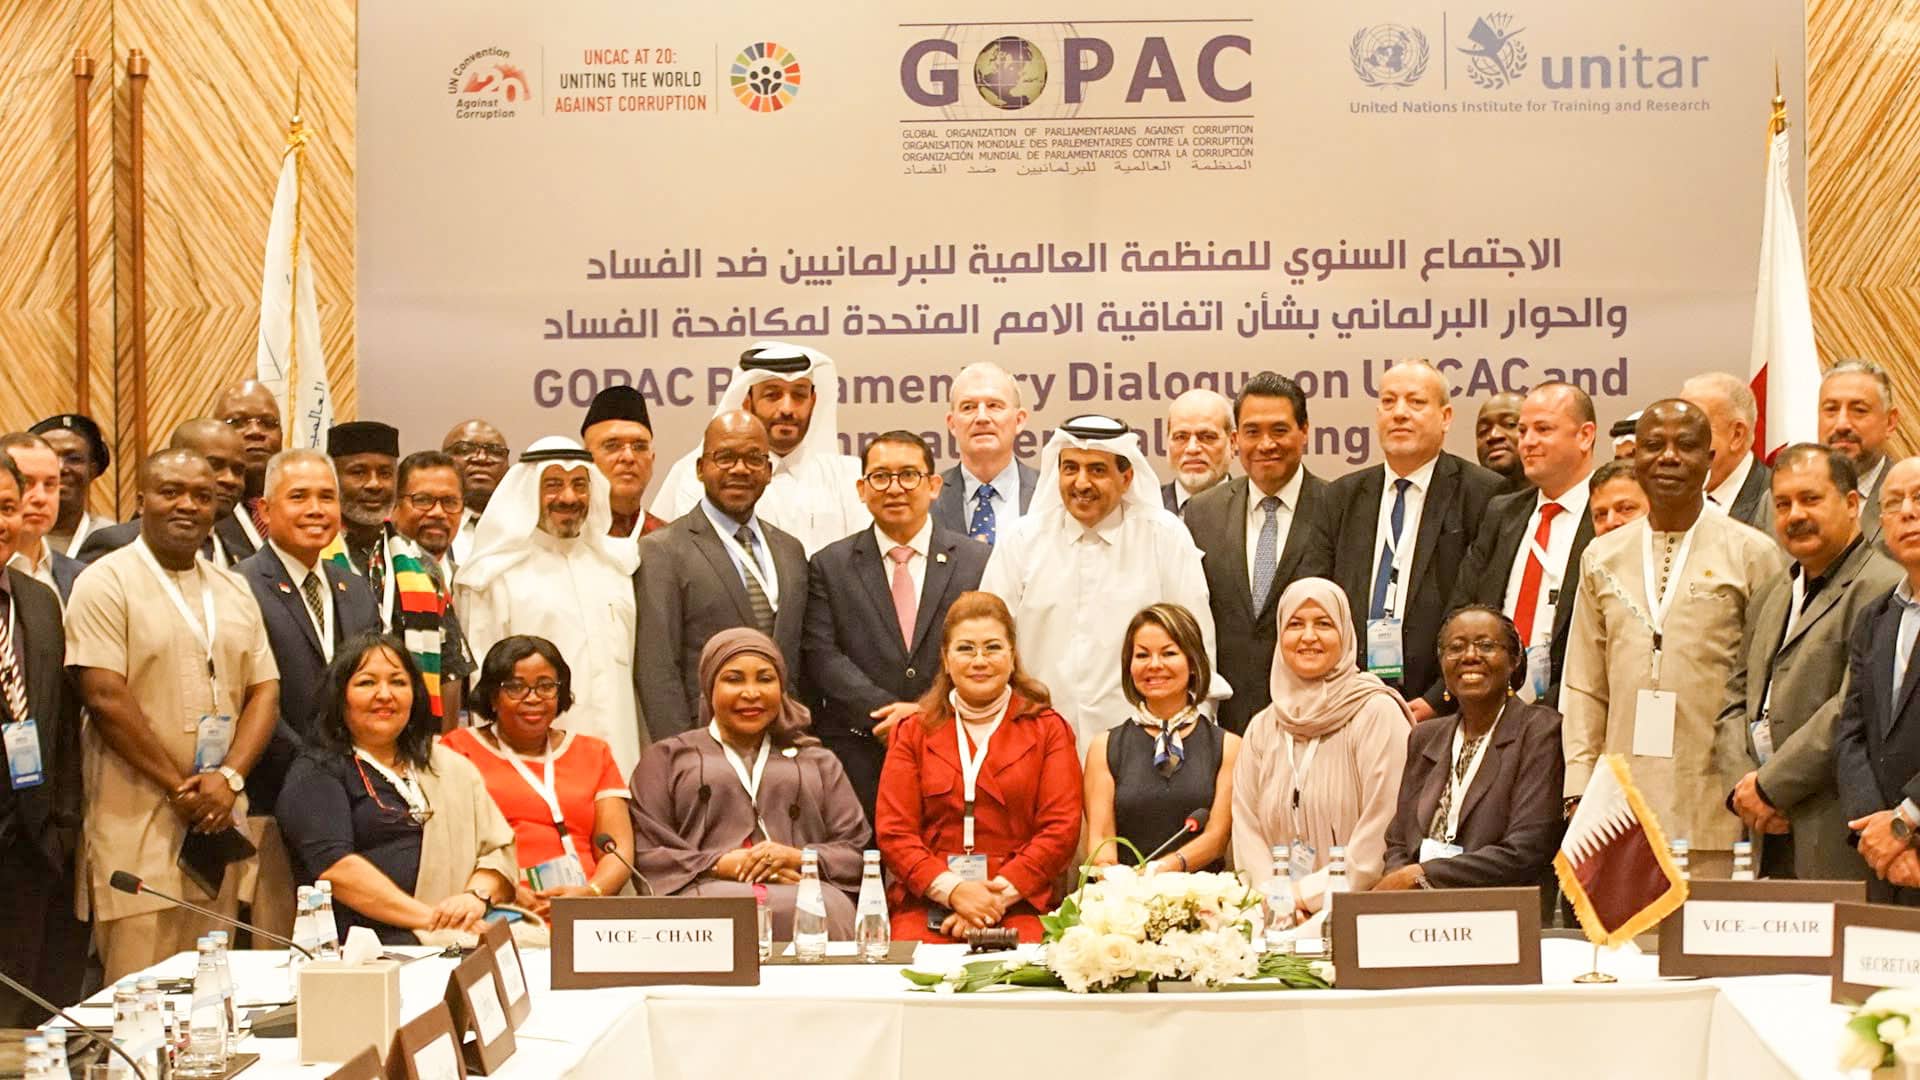 Parliamentary Dialogue on UNCAC & AGM